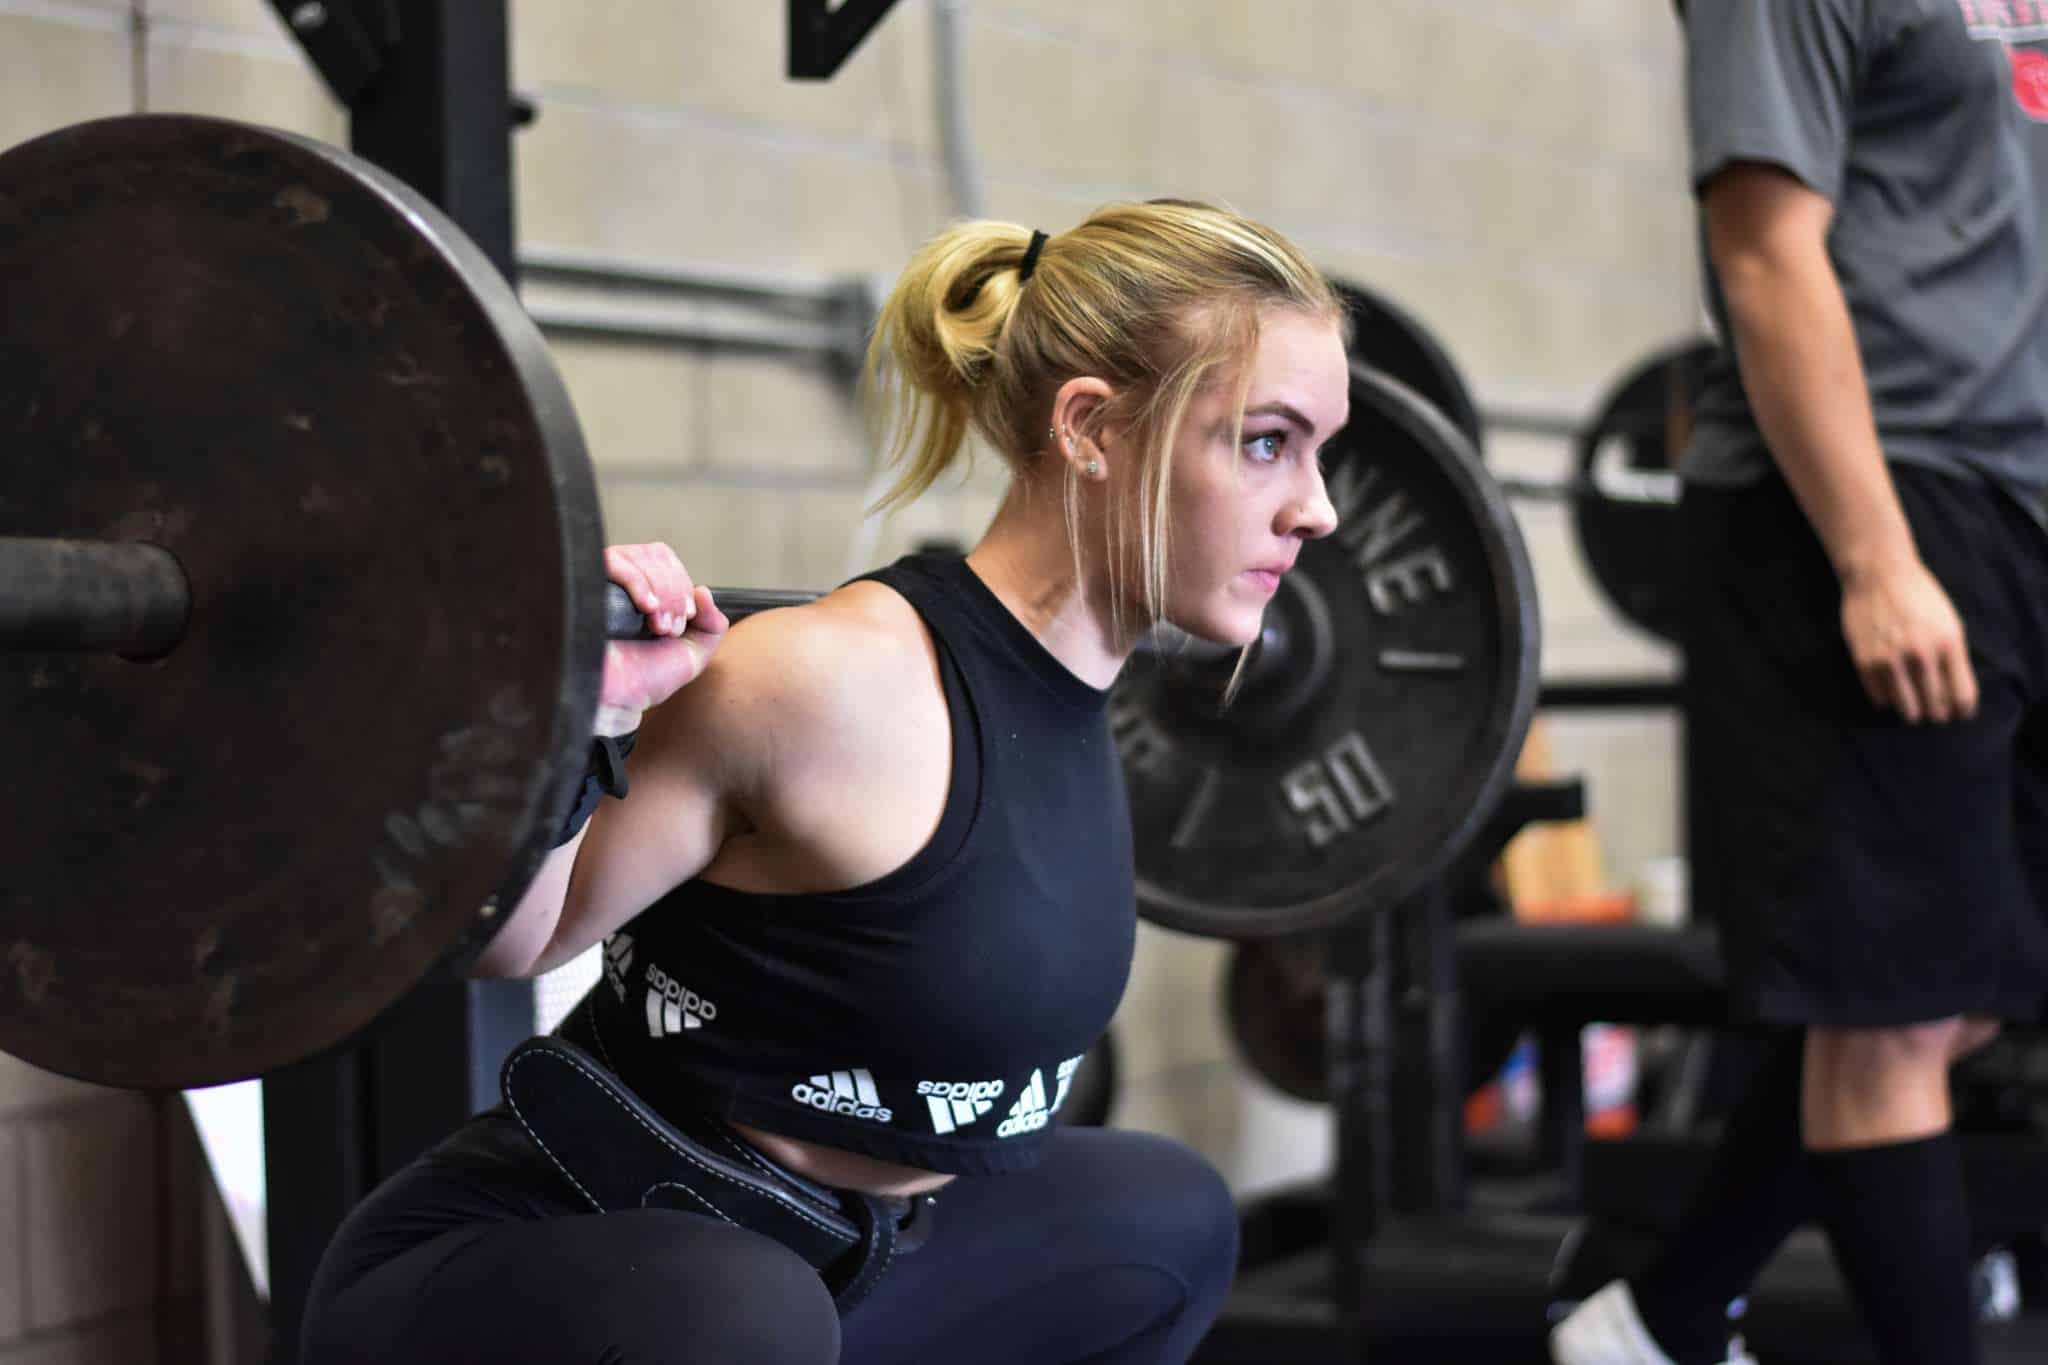 What Does the Life of a Powerlifter Look Like? - My Powerlifting Life